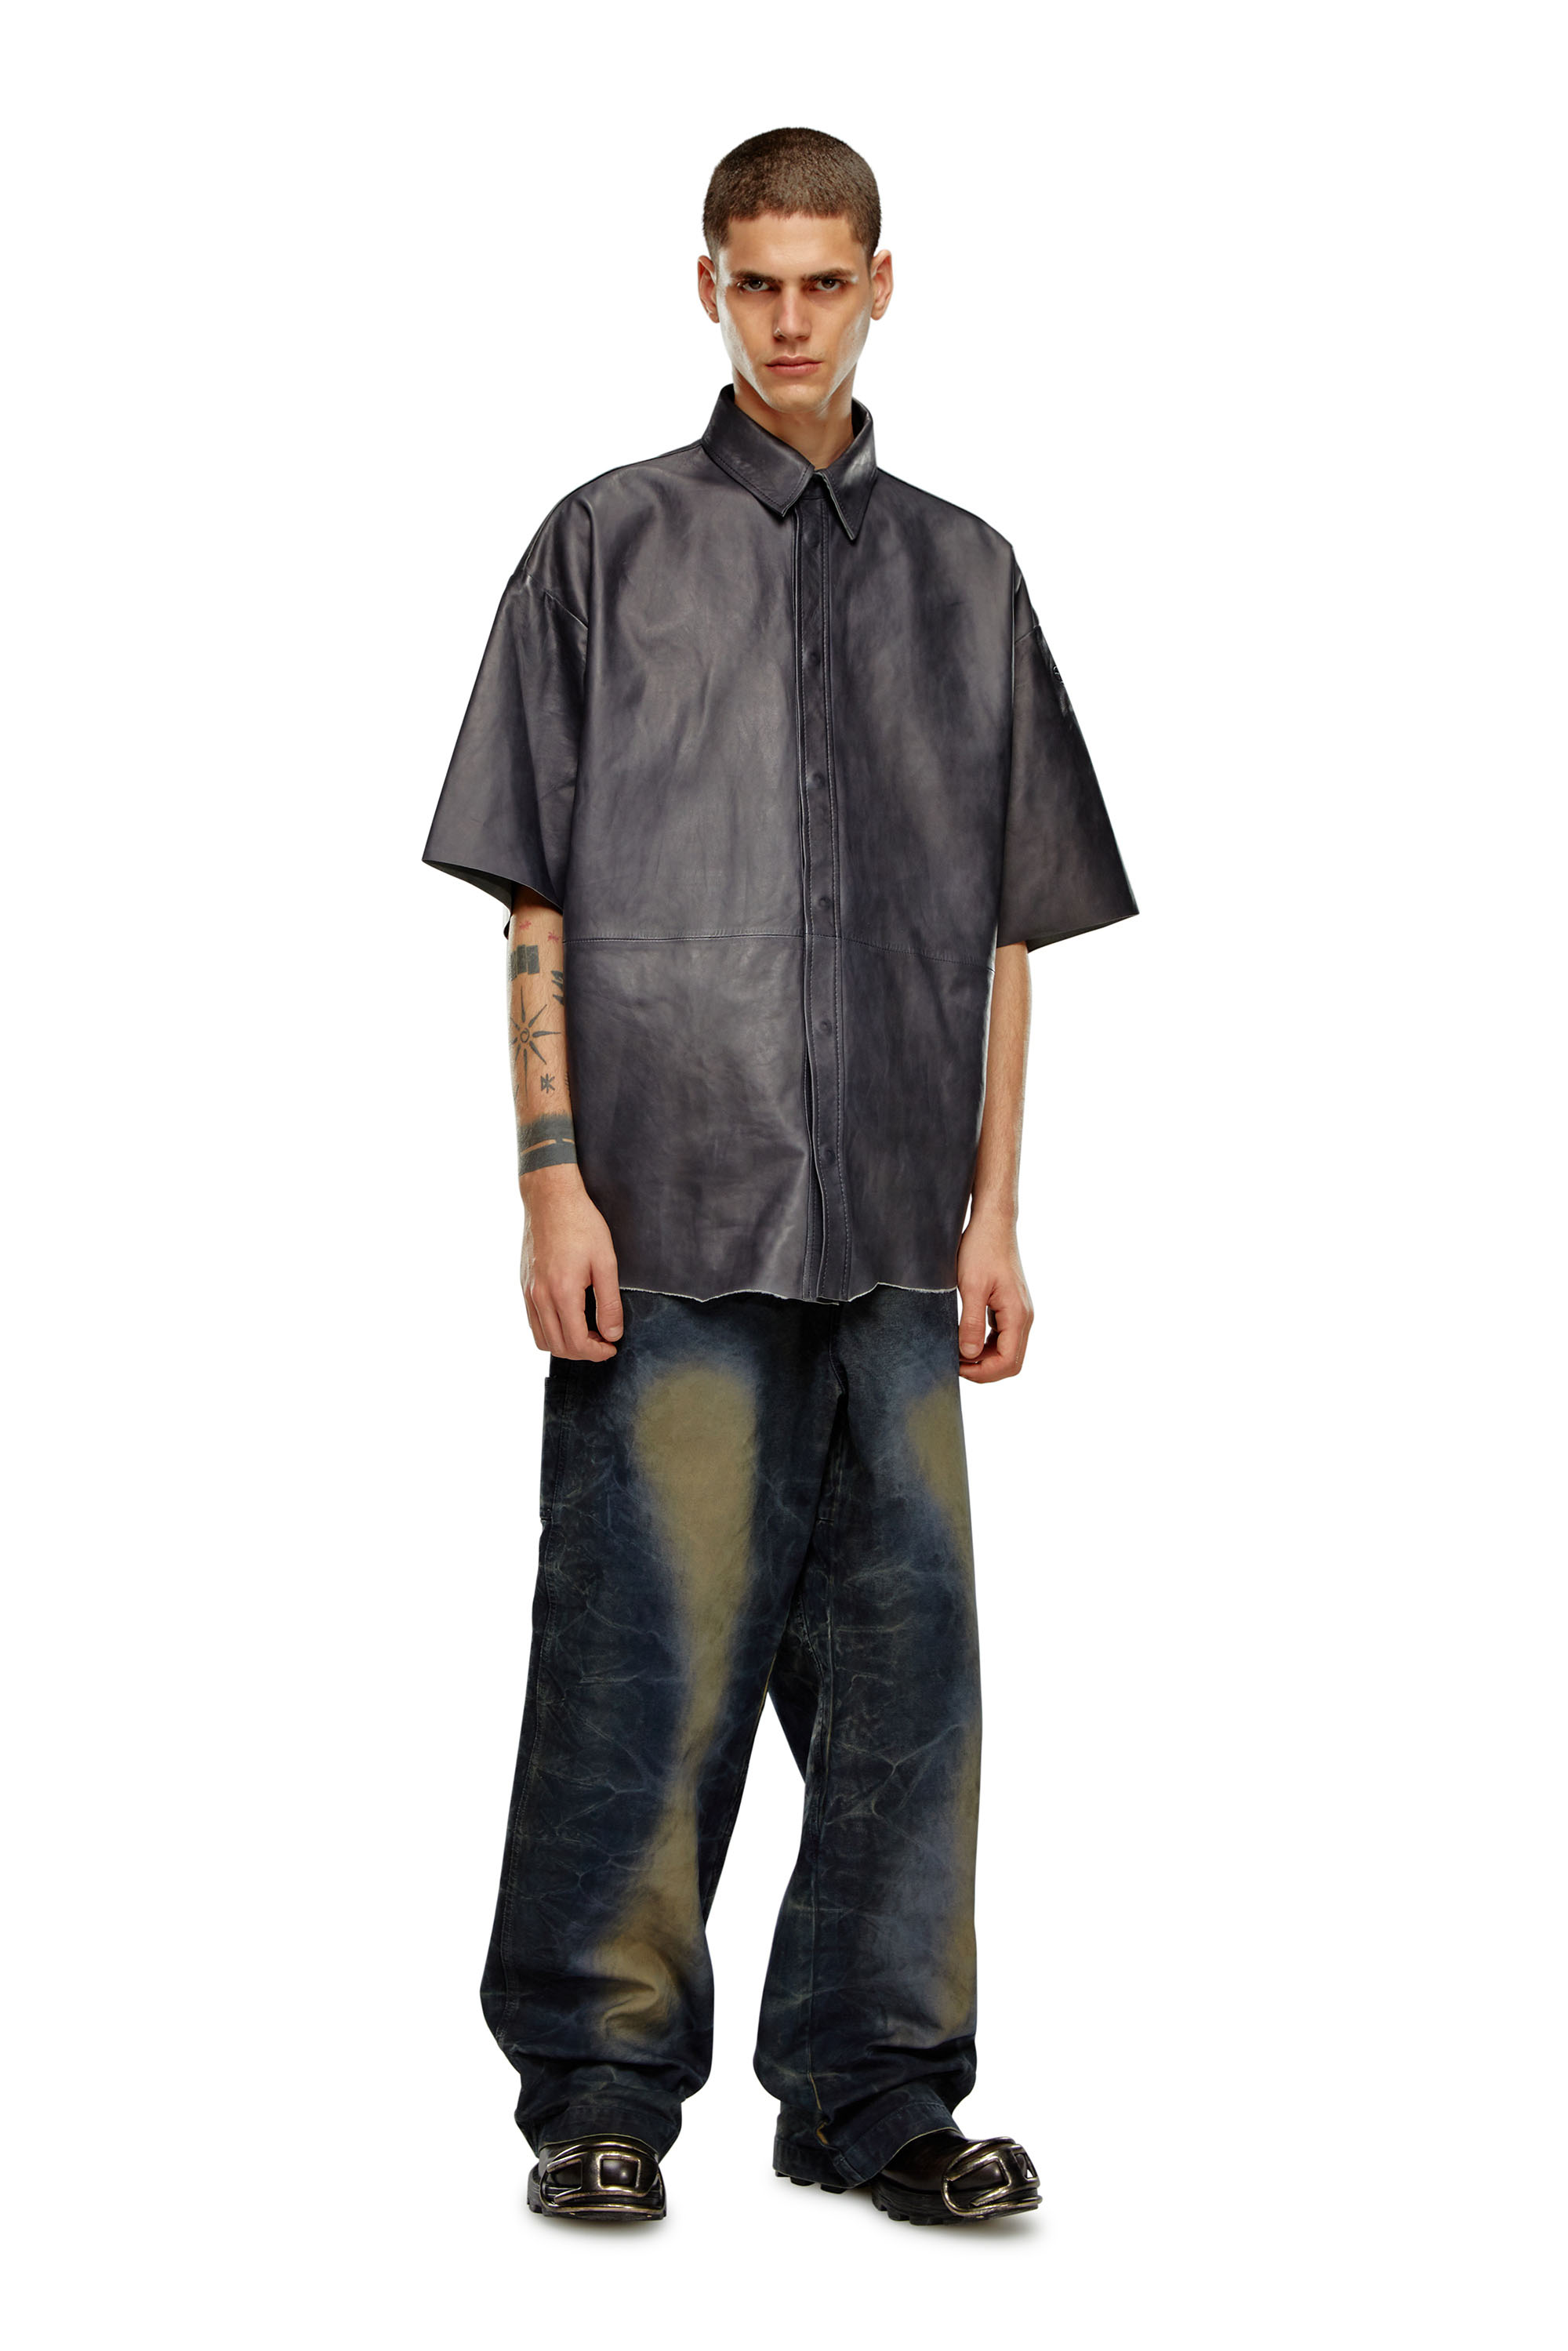 Diesel - S-EMIN-LTH, Man Oversized shirt in treated leather in Black - Image 2